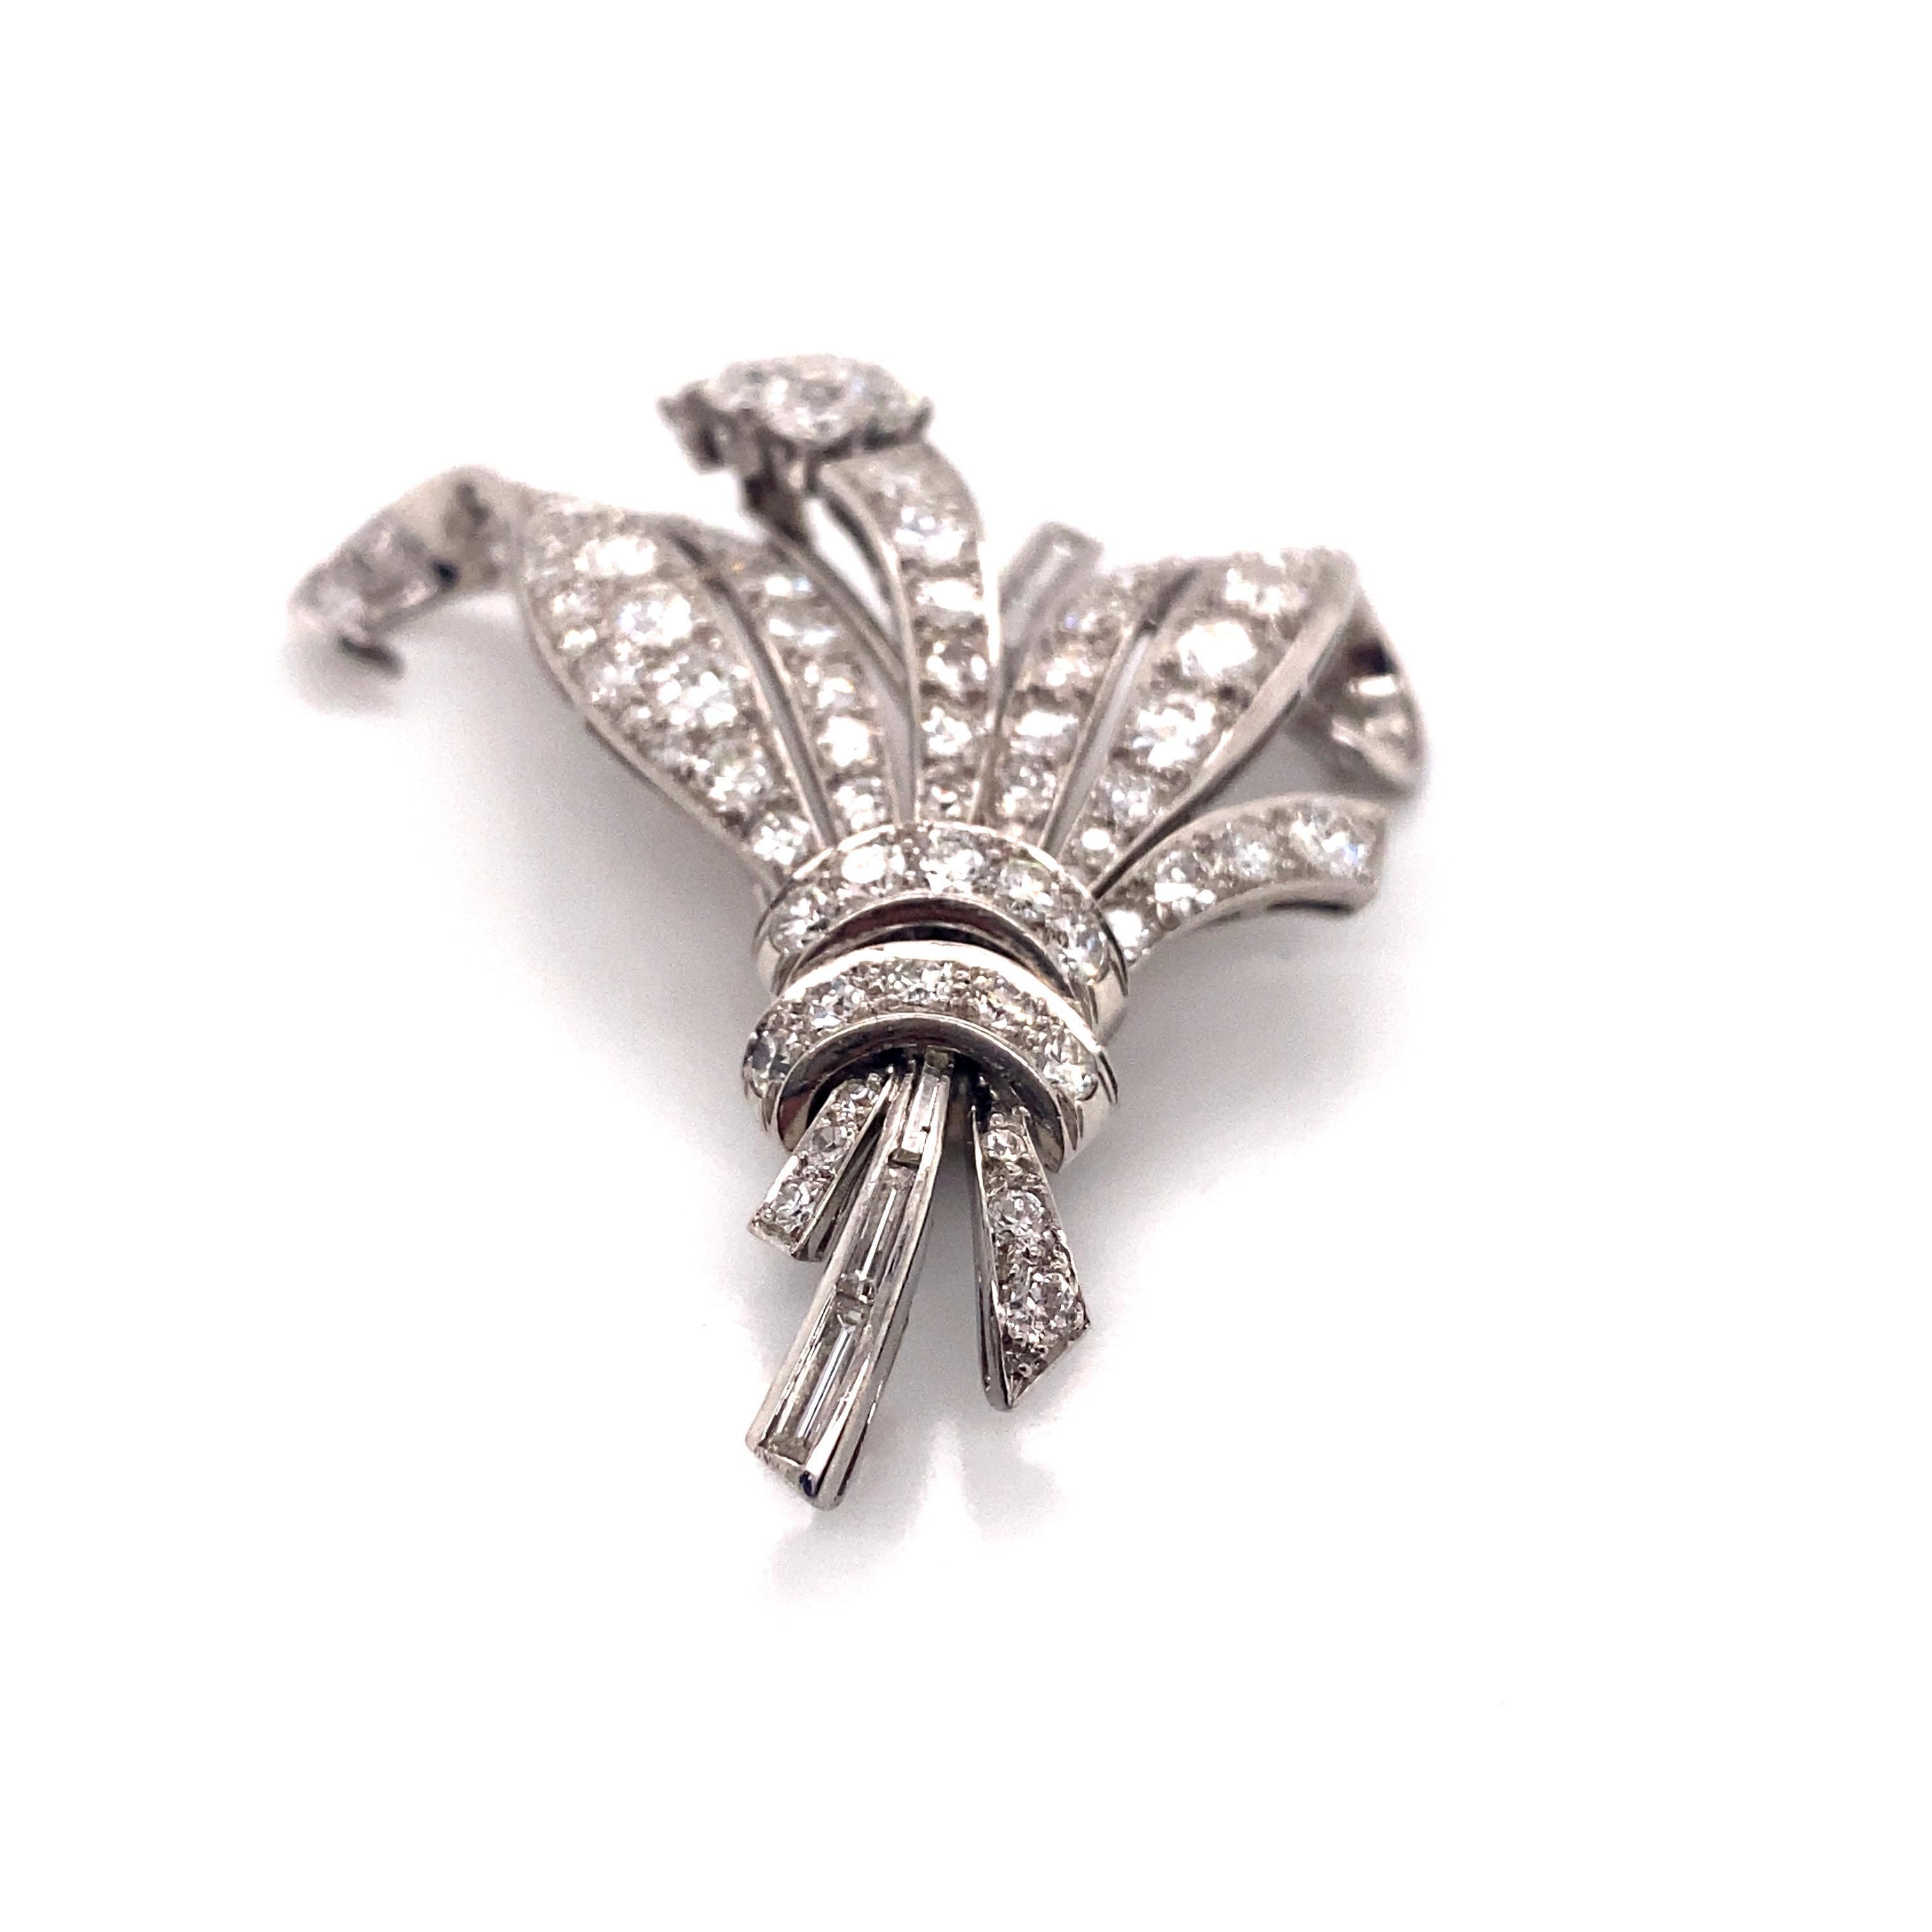 This exquisite brooch is a stunning example of 1960s jewelry craftsmanship. Crafted in luxurious platinum, it features an ornate bouquet design encrusted with 87 round brilliant diamonds totaling an impressive 5.79 carats. The diamonds exhibit a